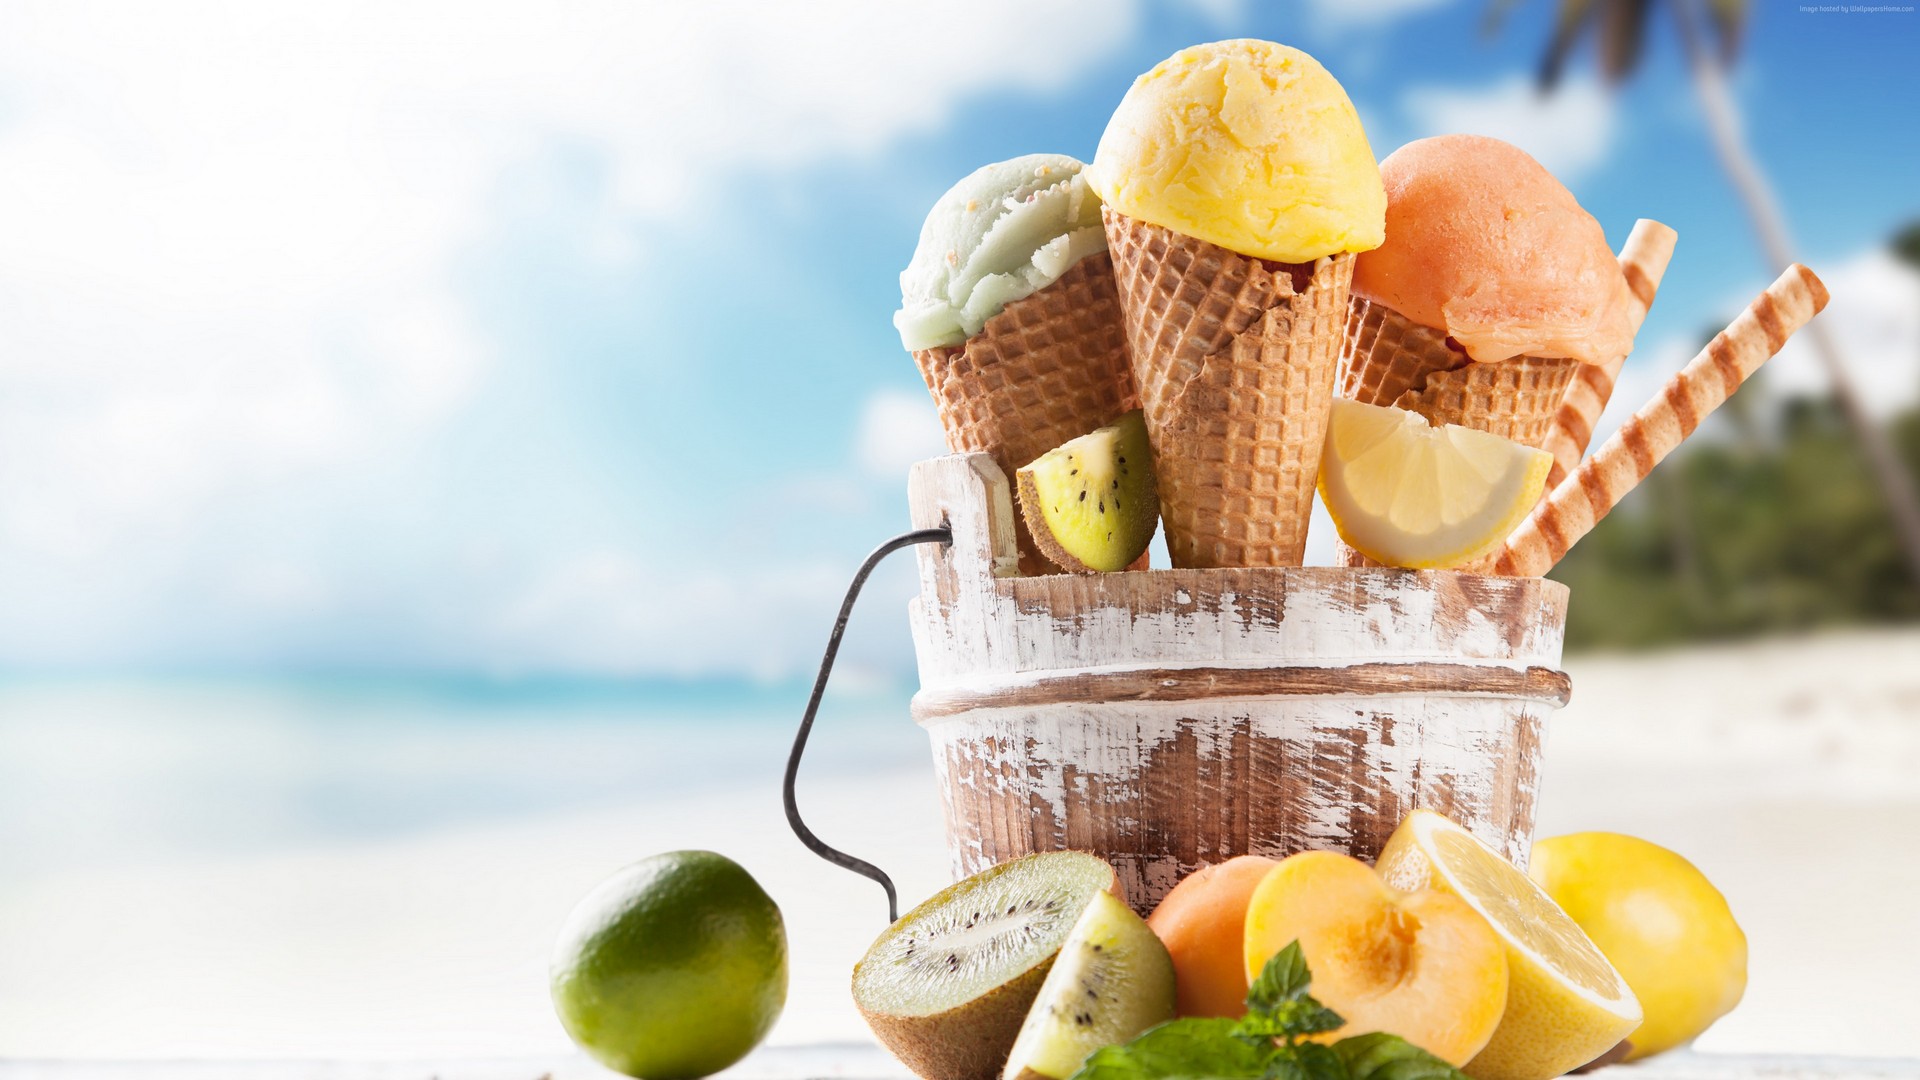 Computer Wallpapers Ice Cream with high-resolution 1920x1080 pixel. You can use this wallpaper for your Windows and Mac OS computers as well as your Android and iPhone smartphones